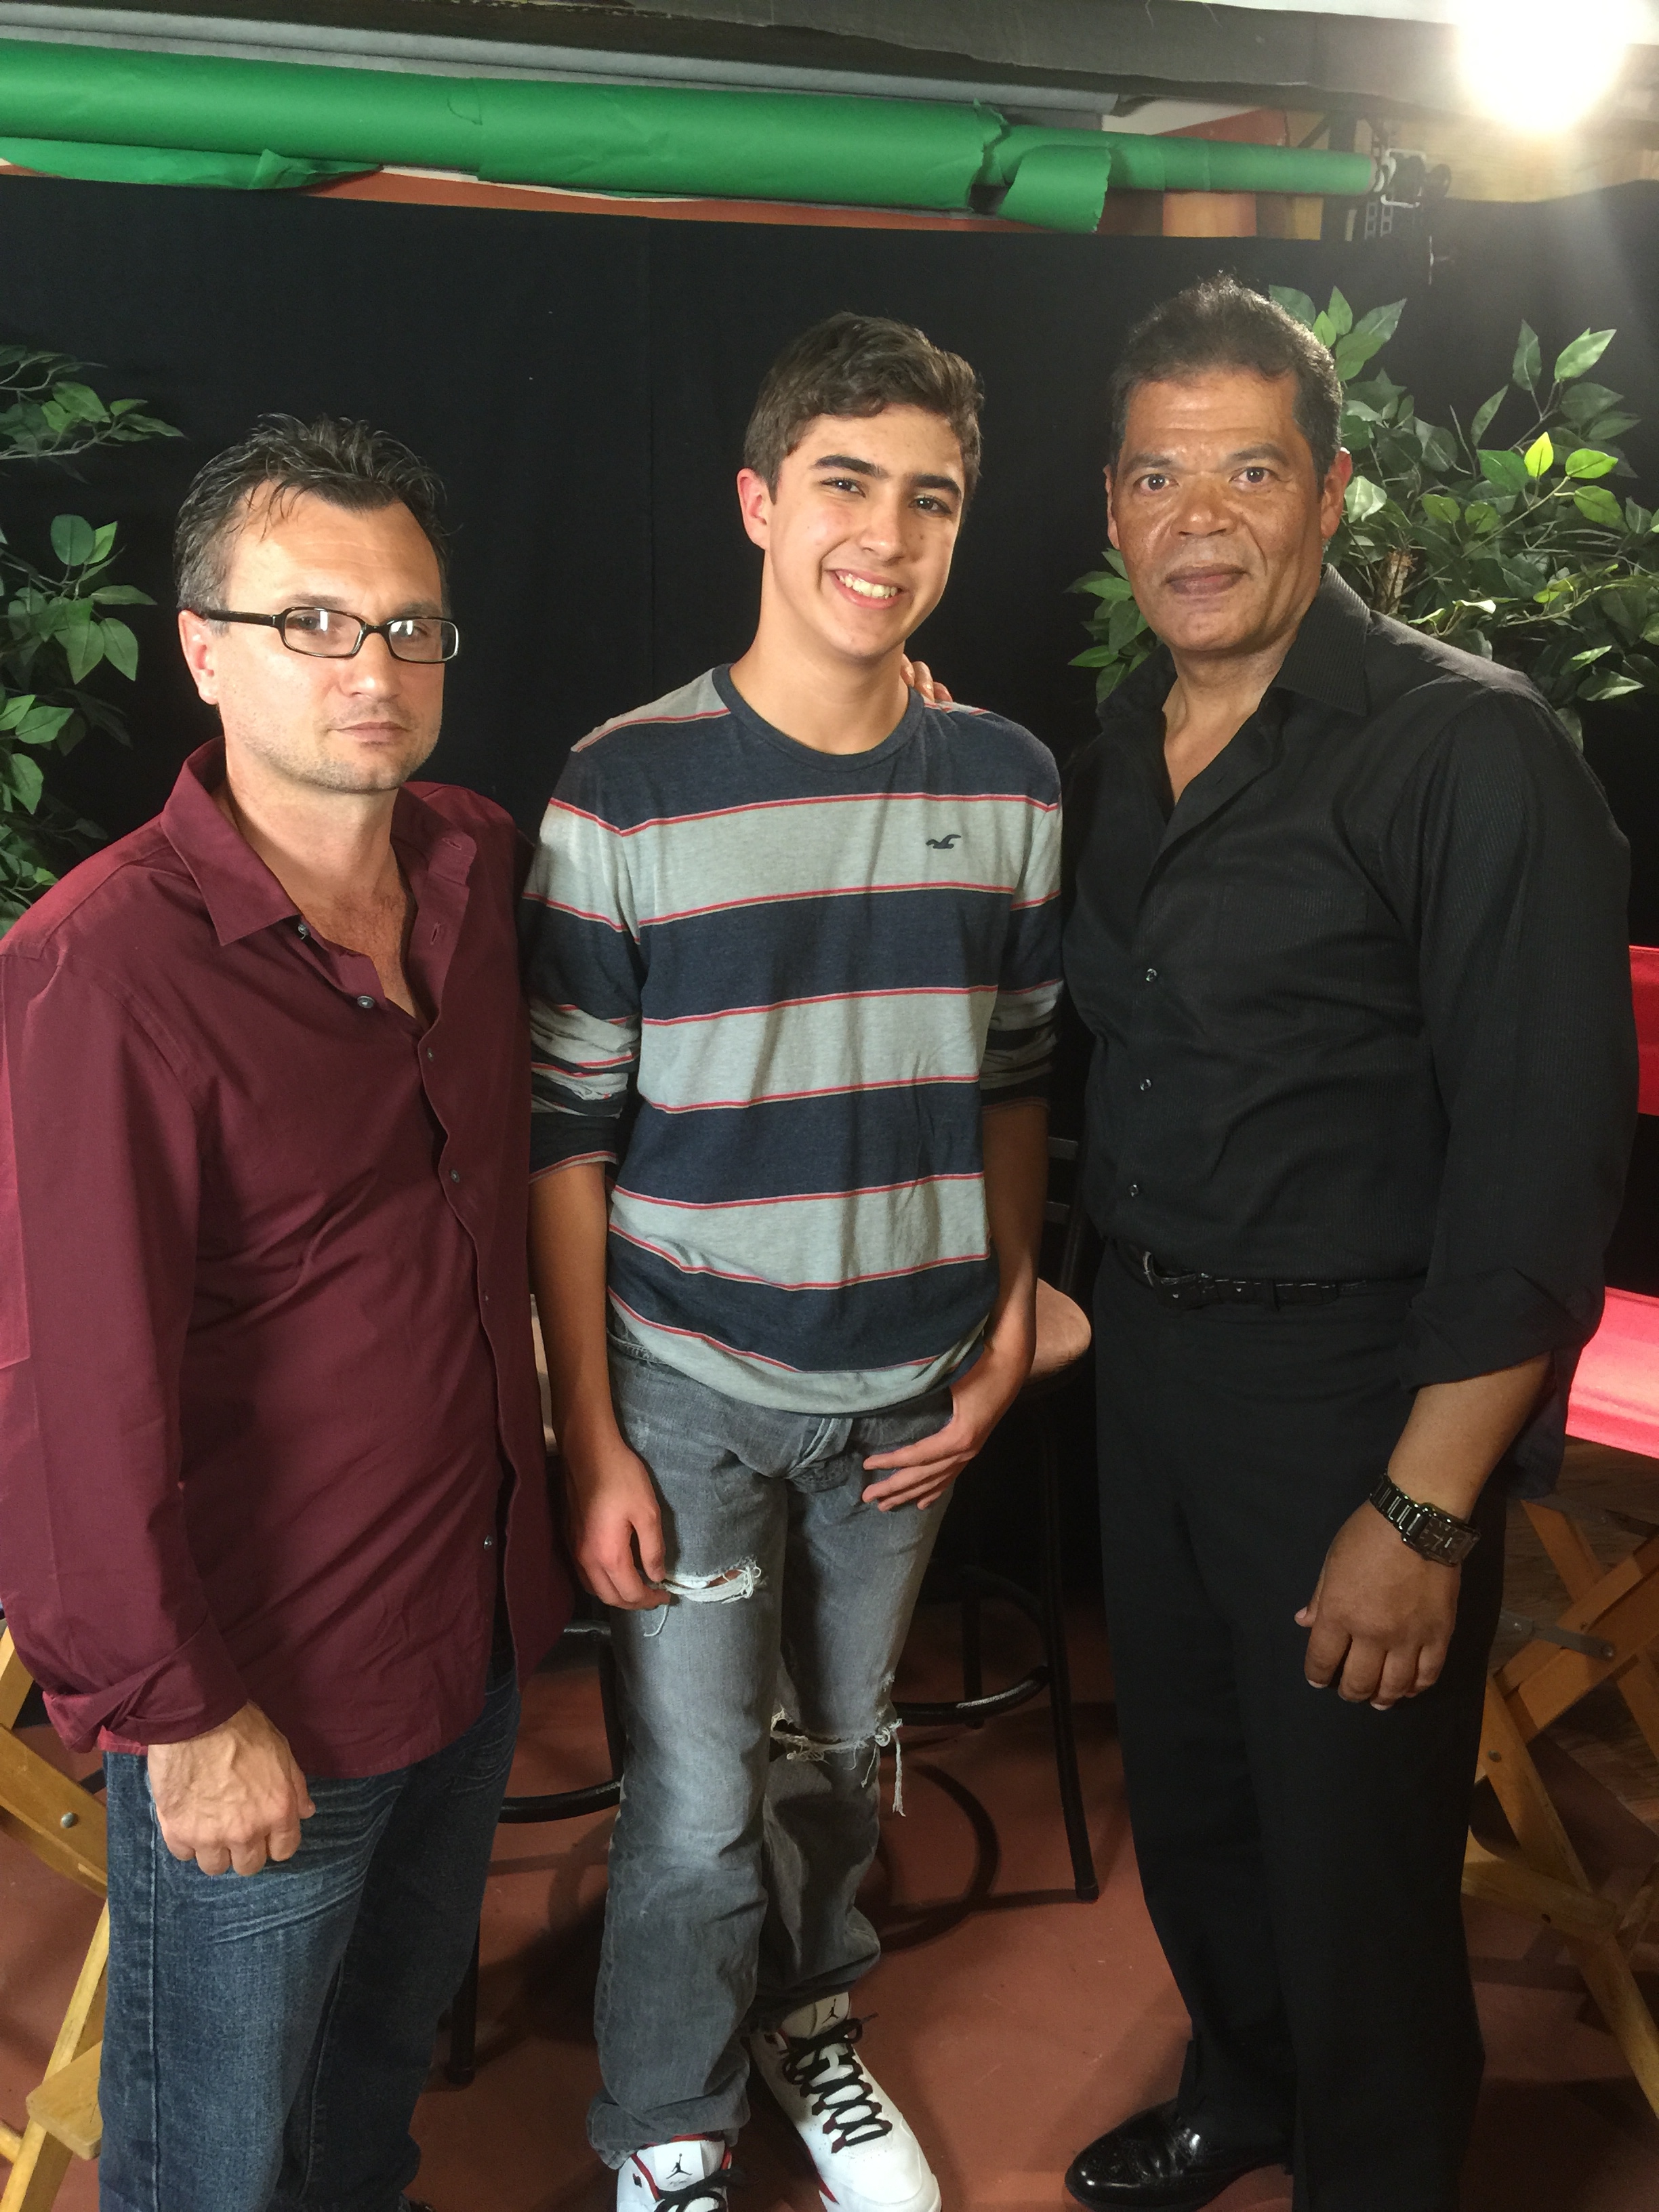 Filming together with Executive Producer from NYC Roger Fischer and Actor Tony De Leon